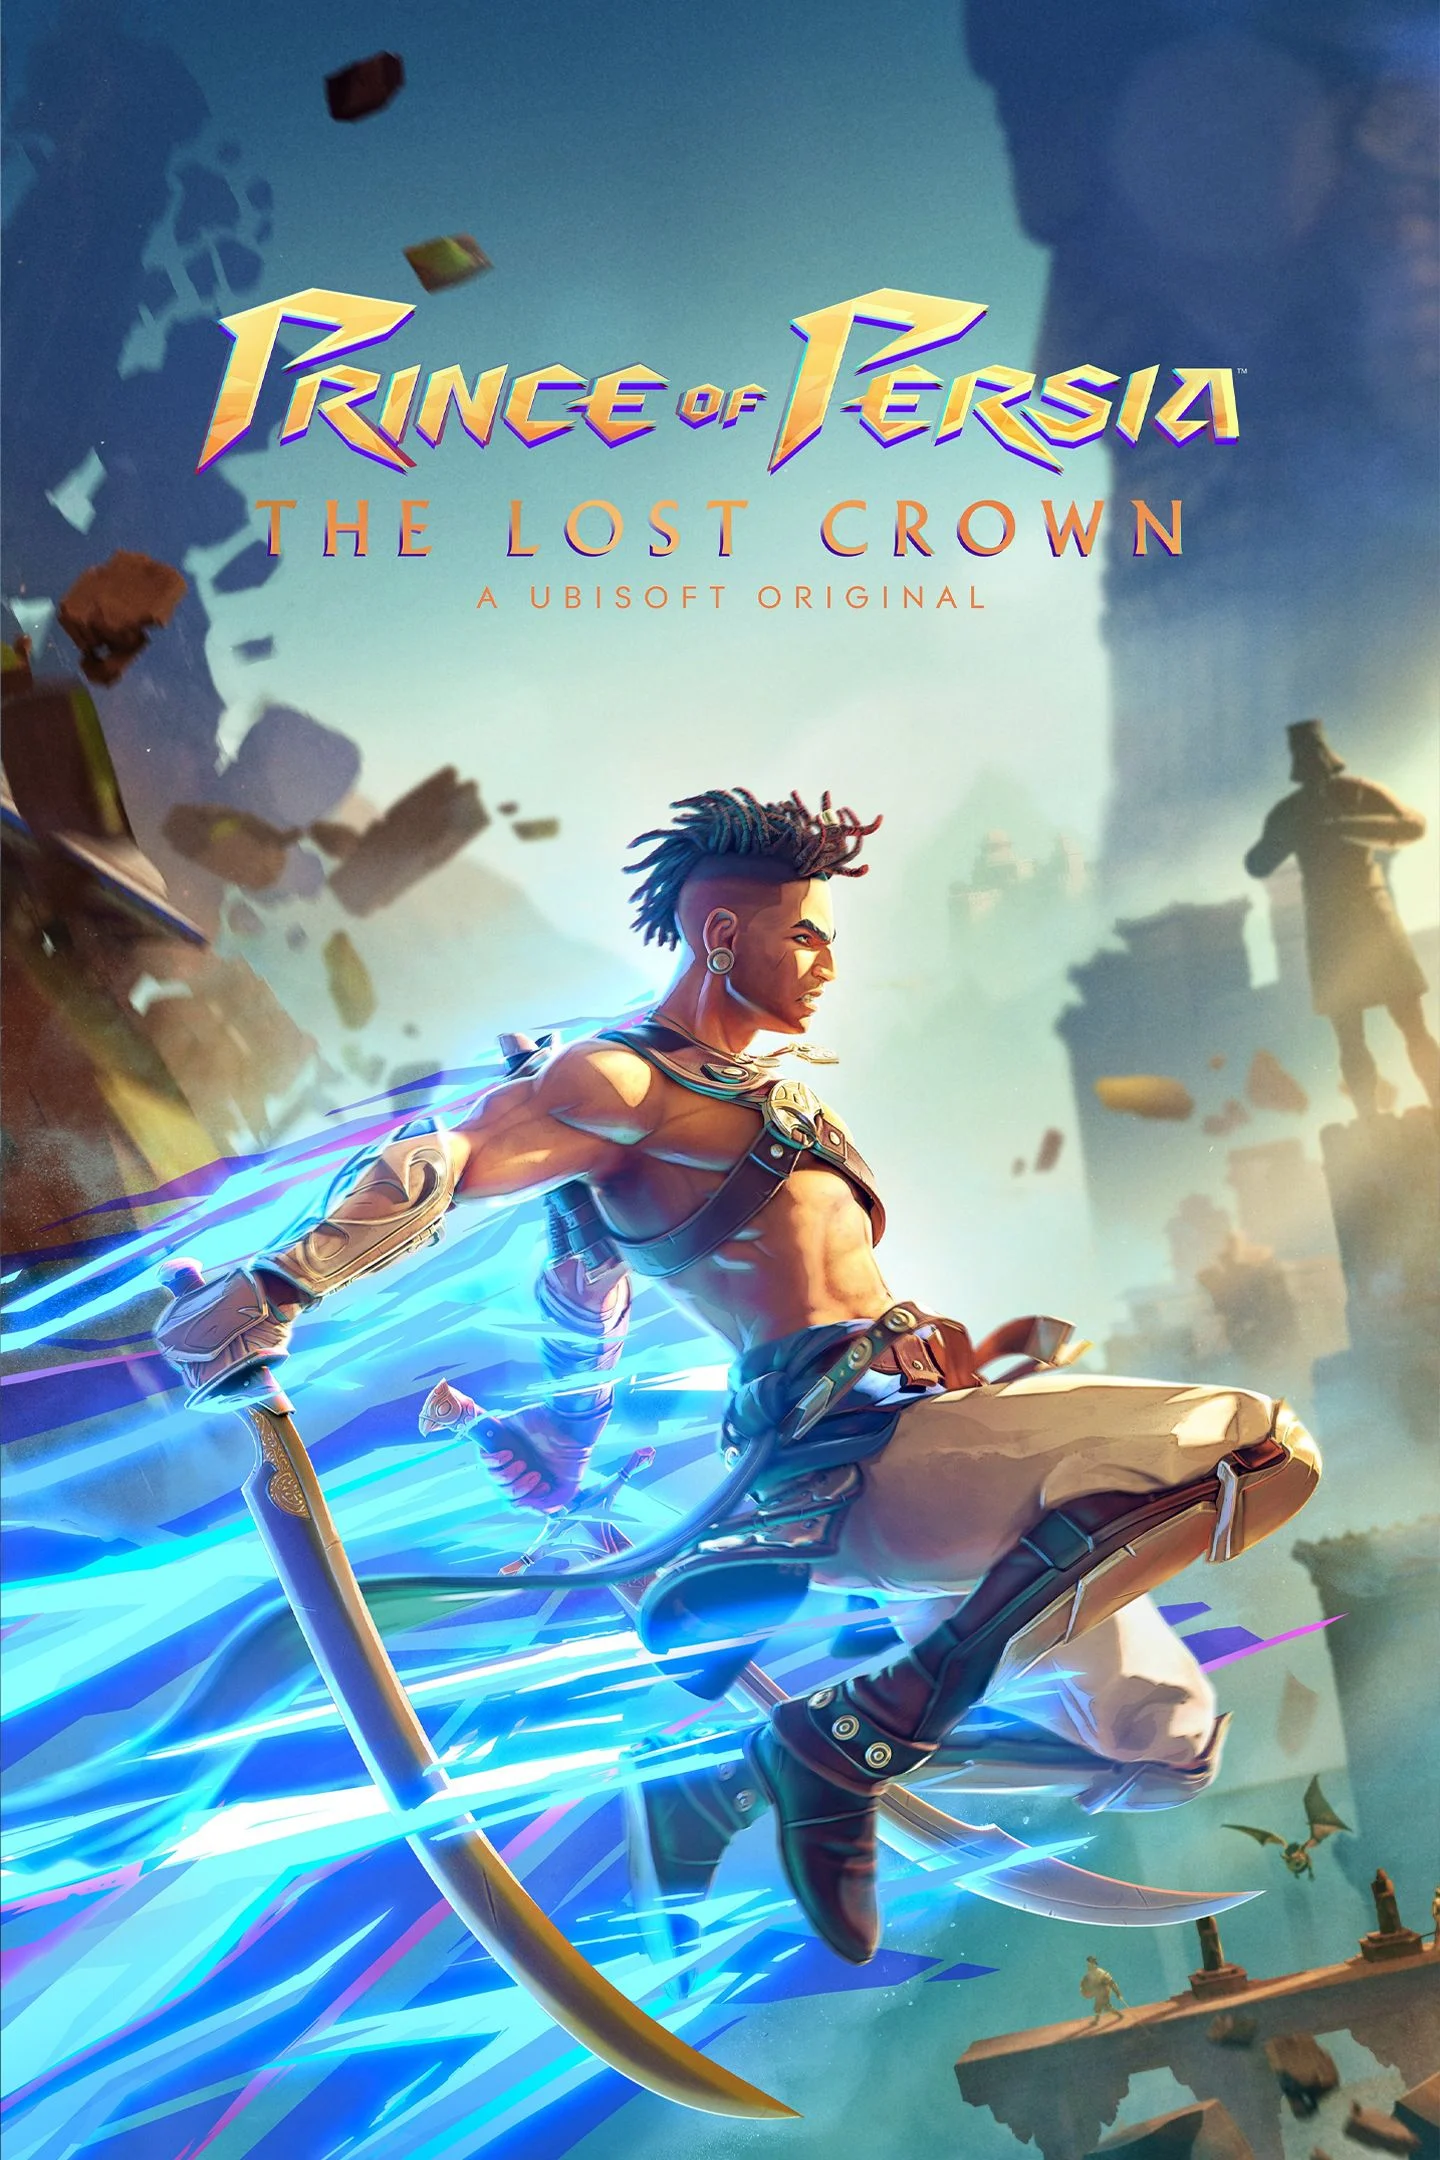 Prince of Persia: The Lost Crown Review - A New Metroidvania Adventure